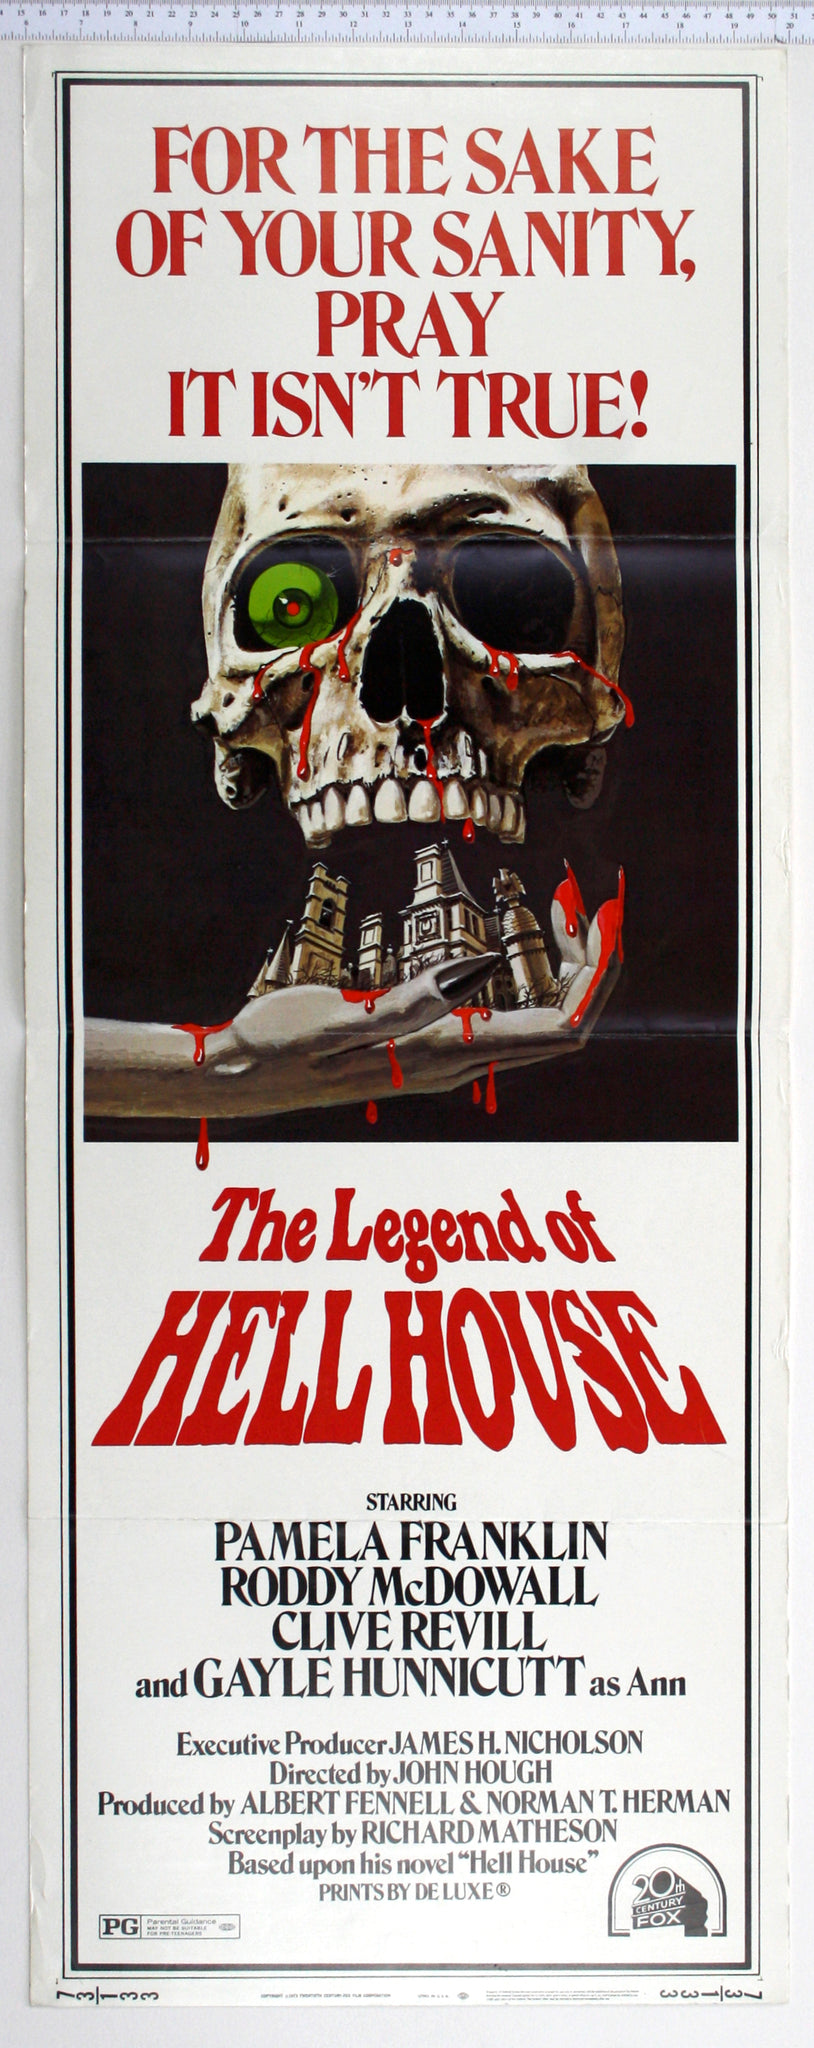 A bloody skull with one eyeball and dripping blood, sits over a hand holding Hell House.